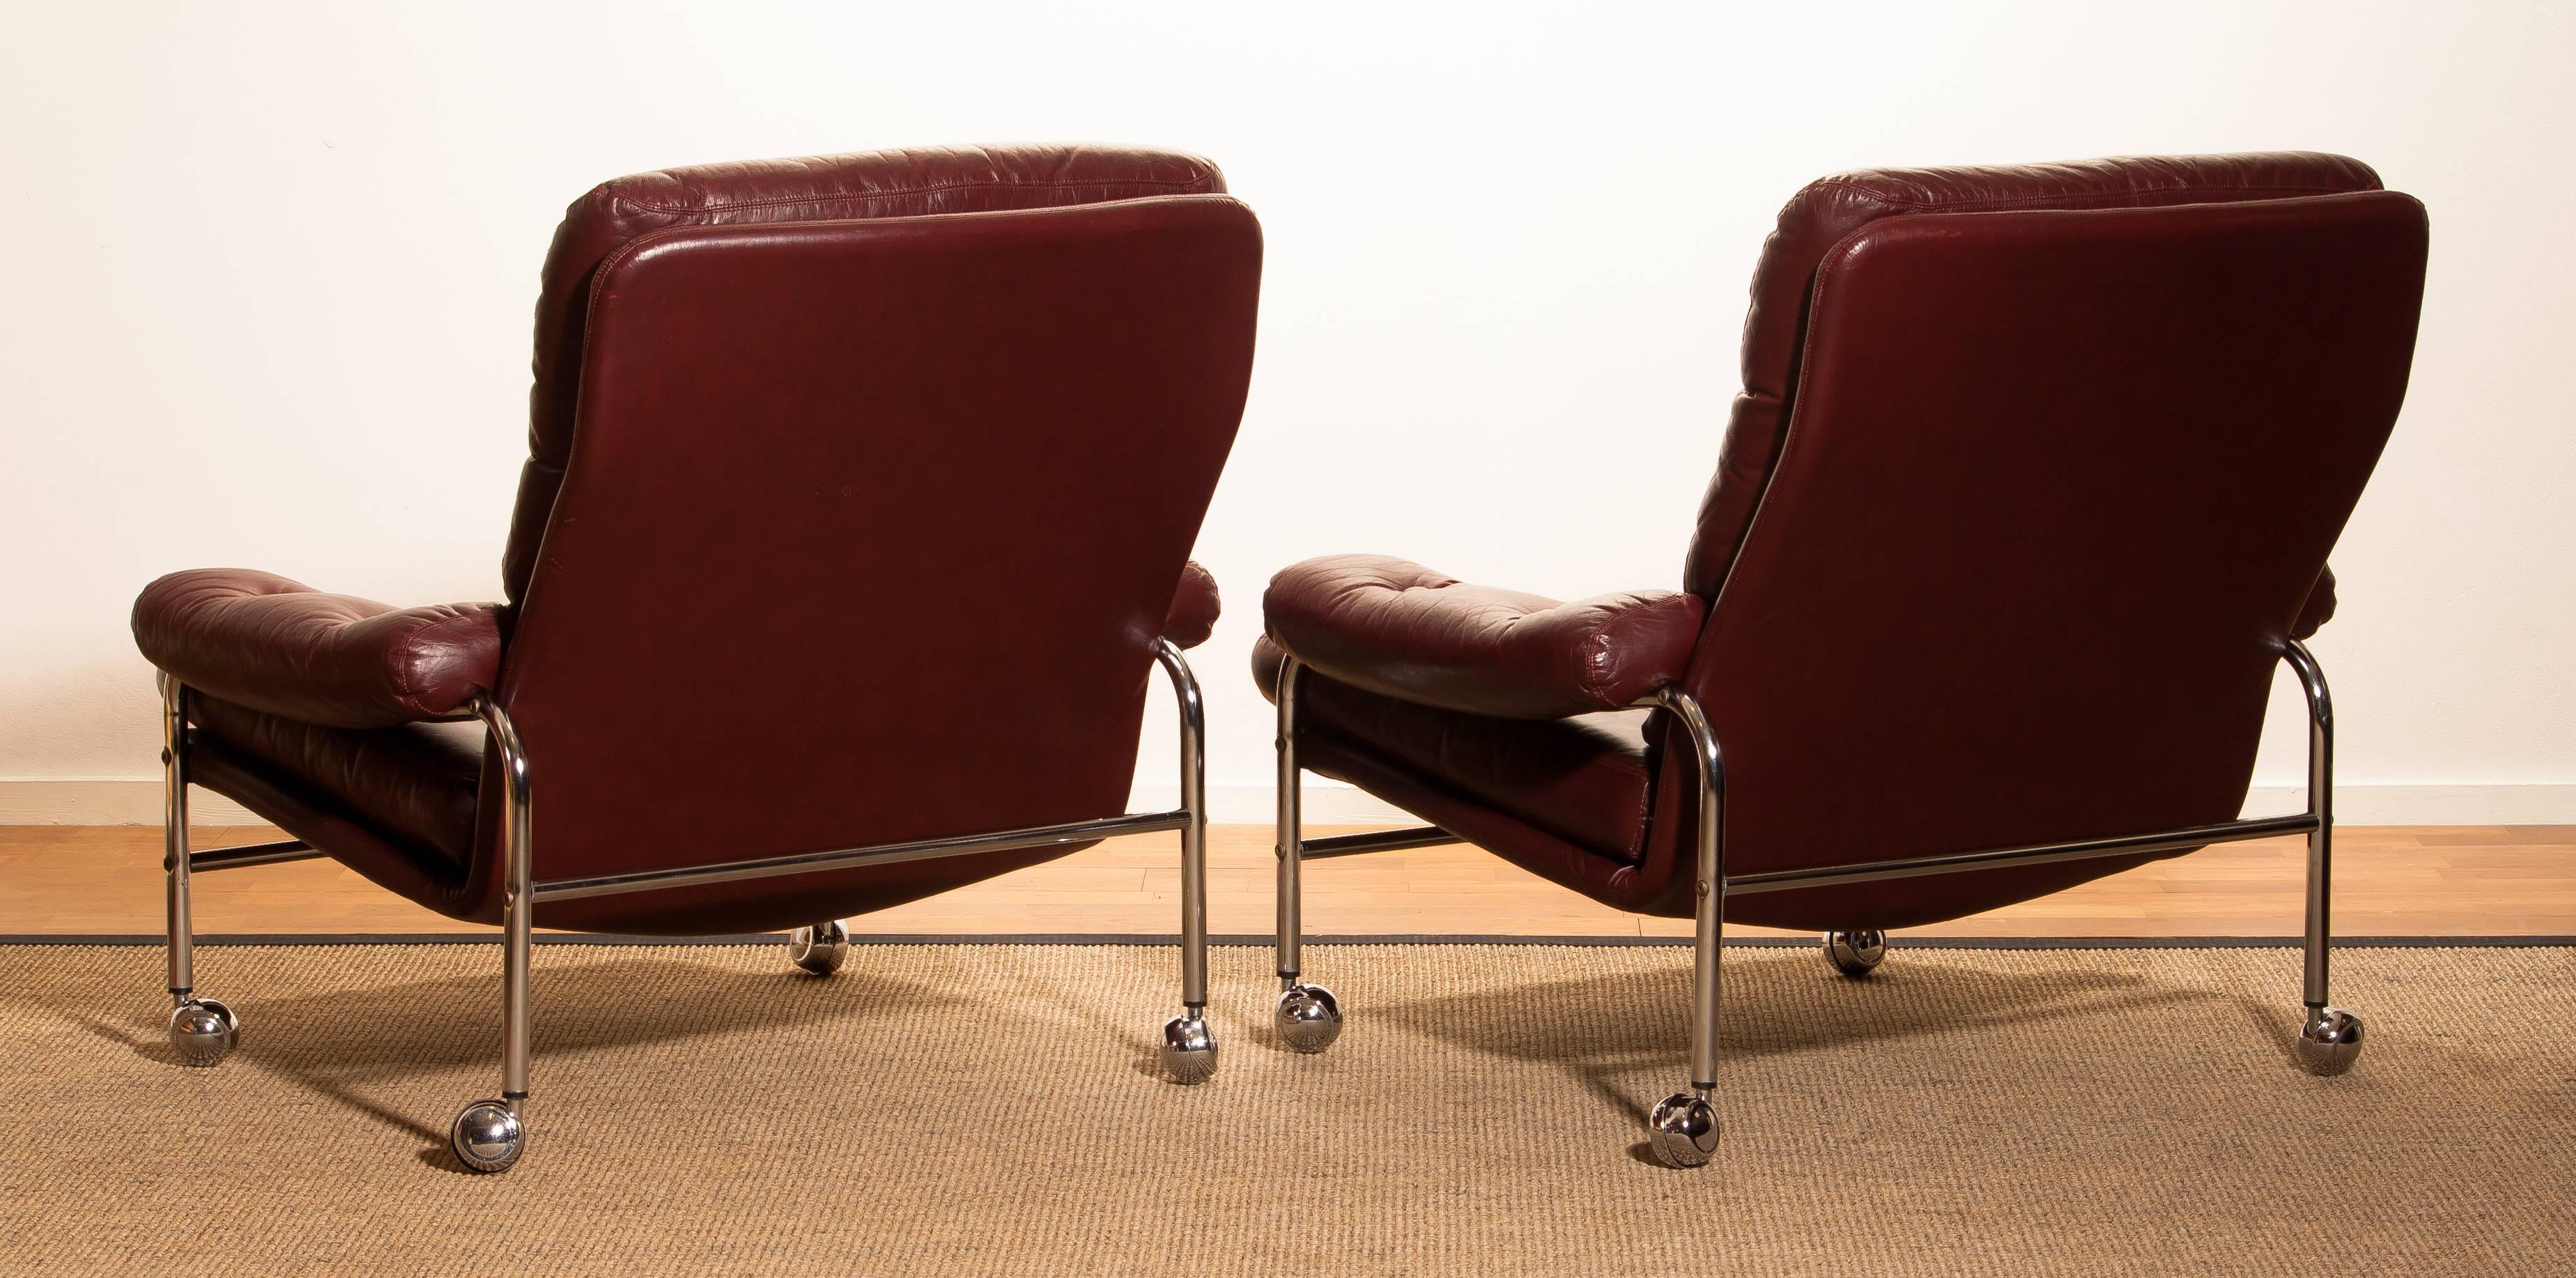 Chrome and Oxen Blood Red Leather Easy / Lounge Chairs by Scapa Rydaholm, Sweden In Good Condition In Silvolde, Gelderland